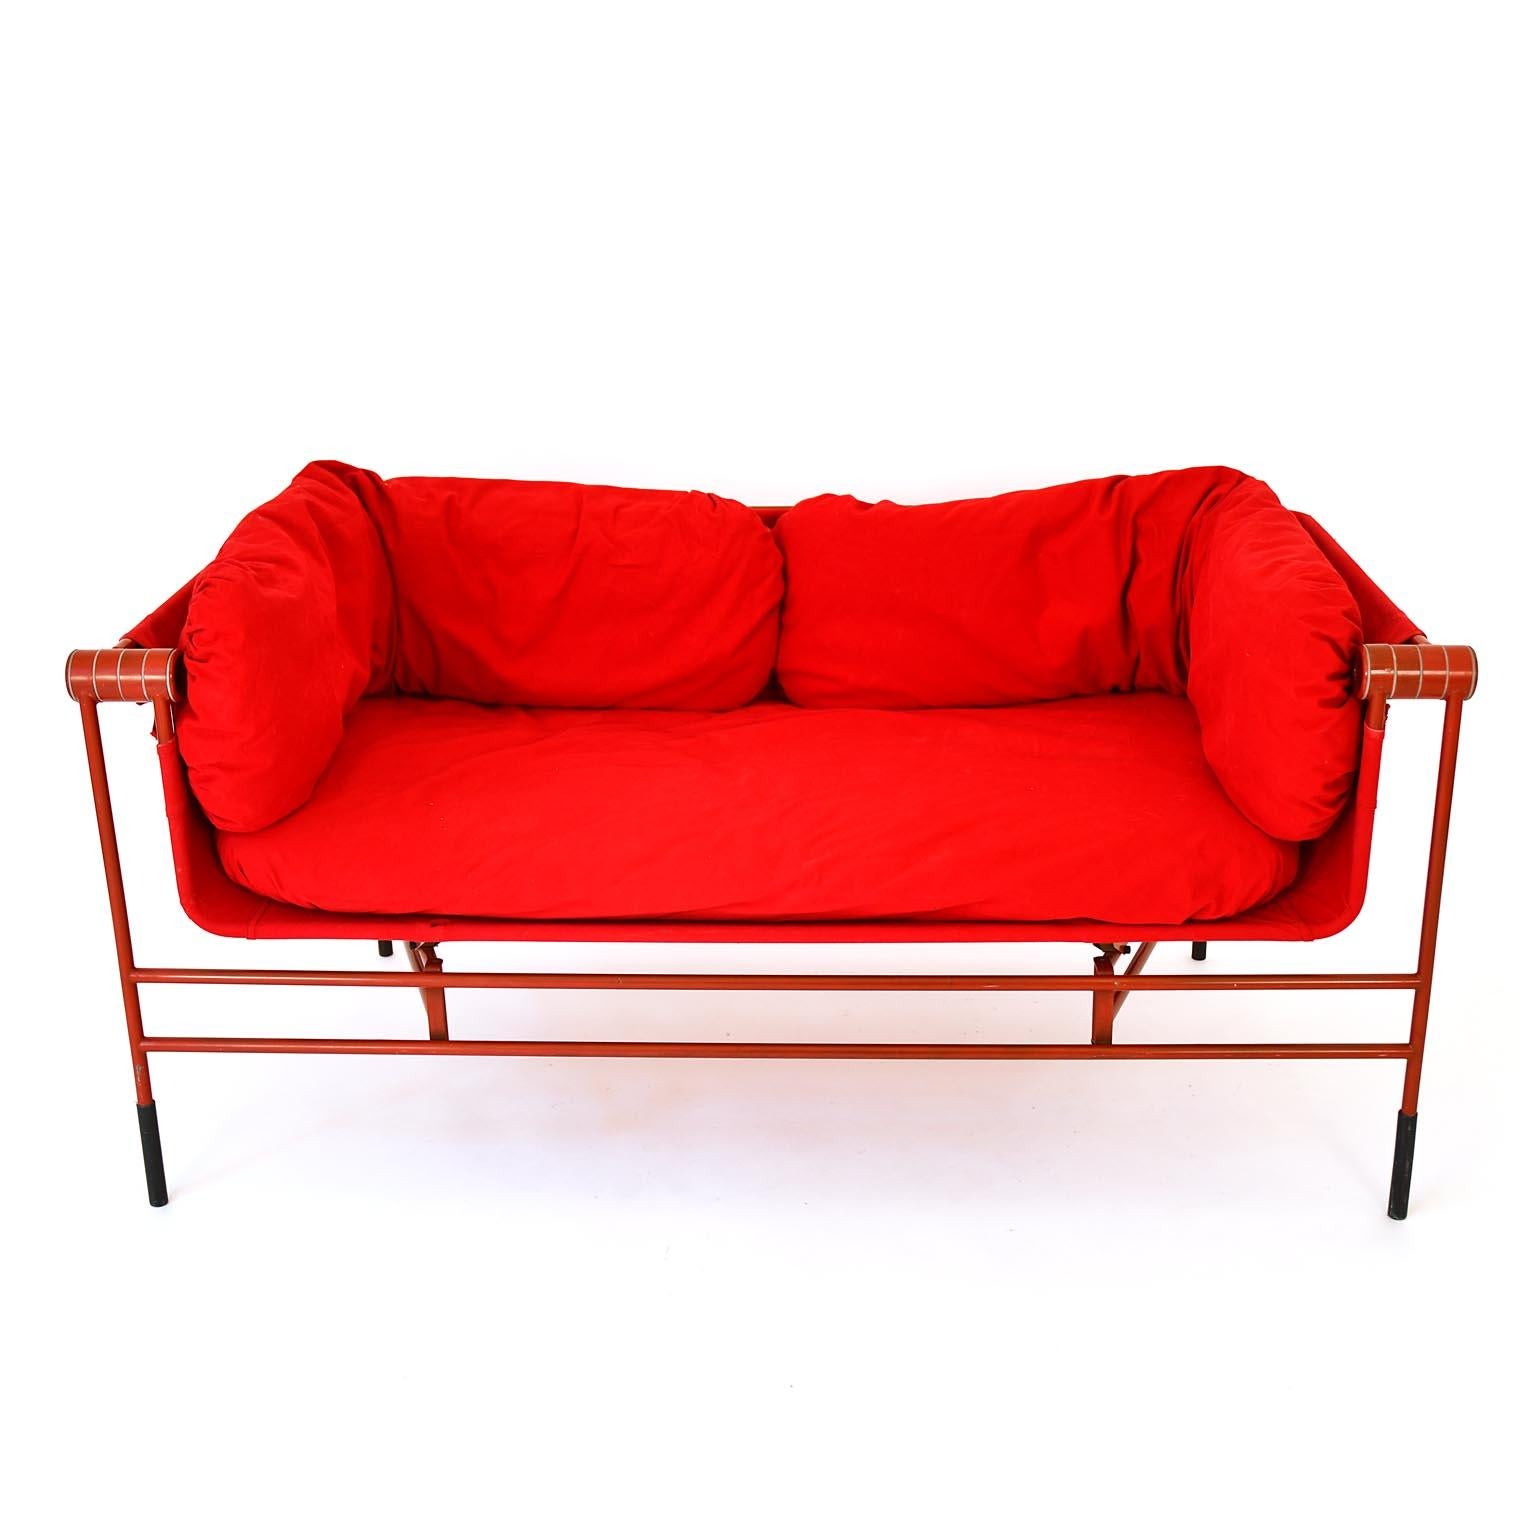 Bruno Rota designed this sofa in 1982. Made of red fabric and a metal base, it captivates with its lightness. This is where the name 